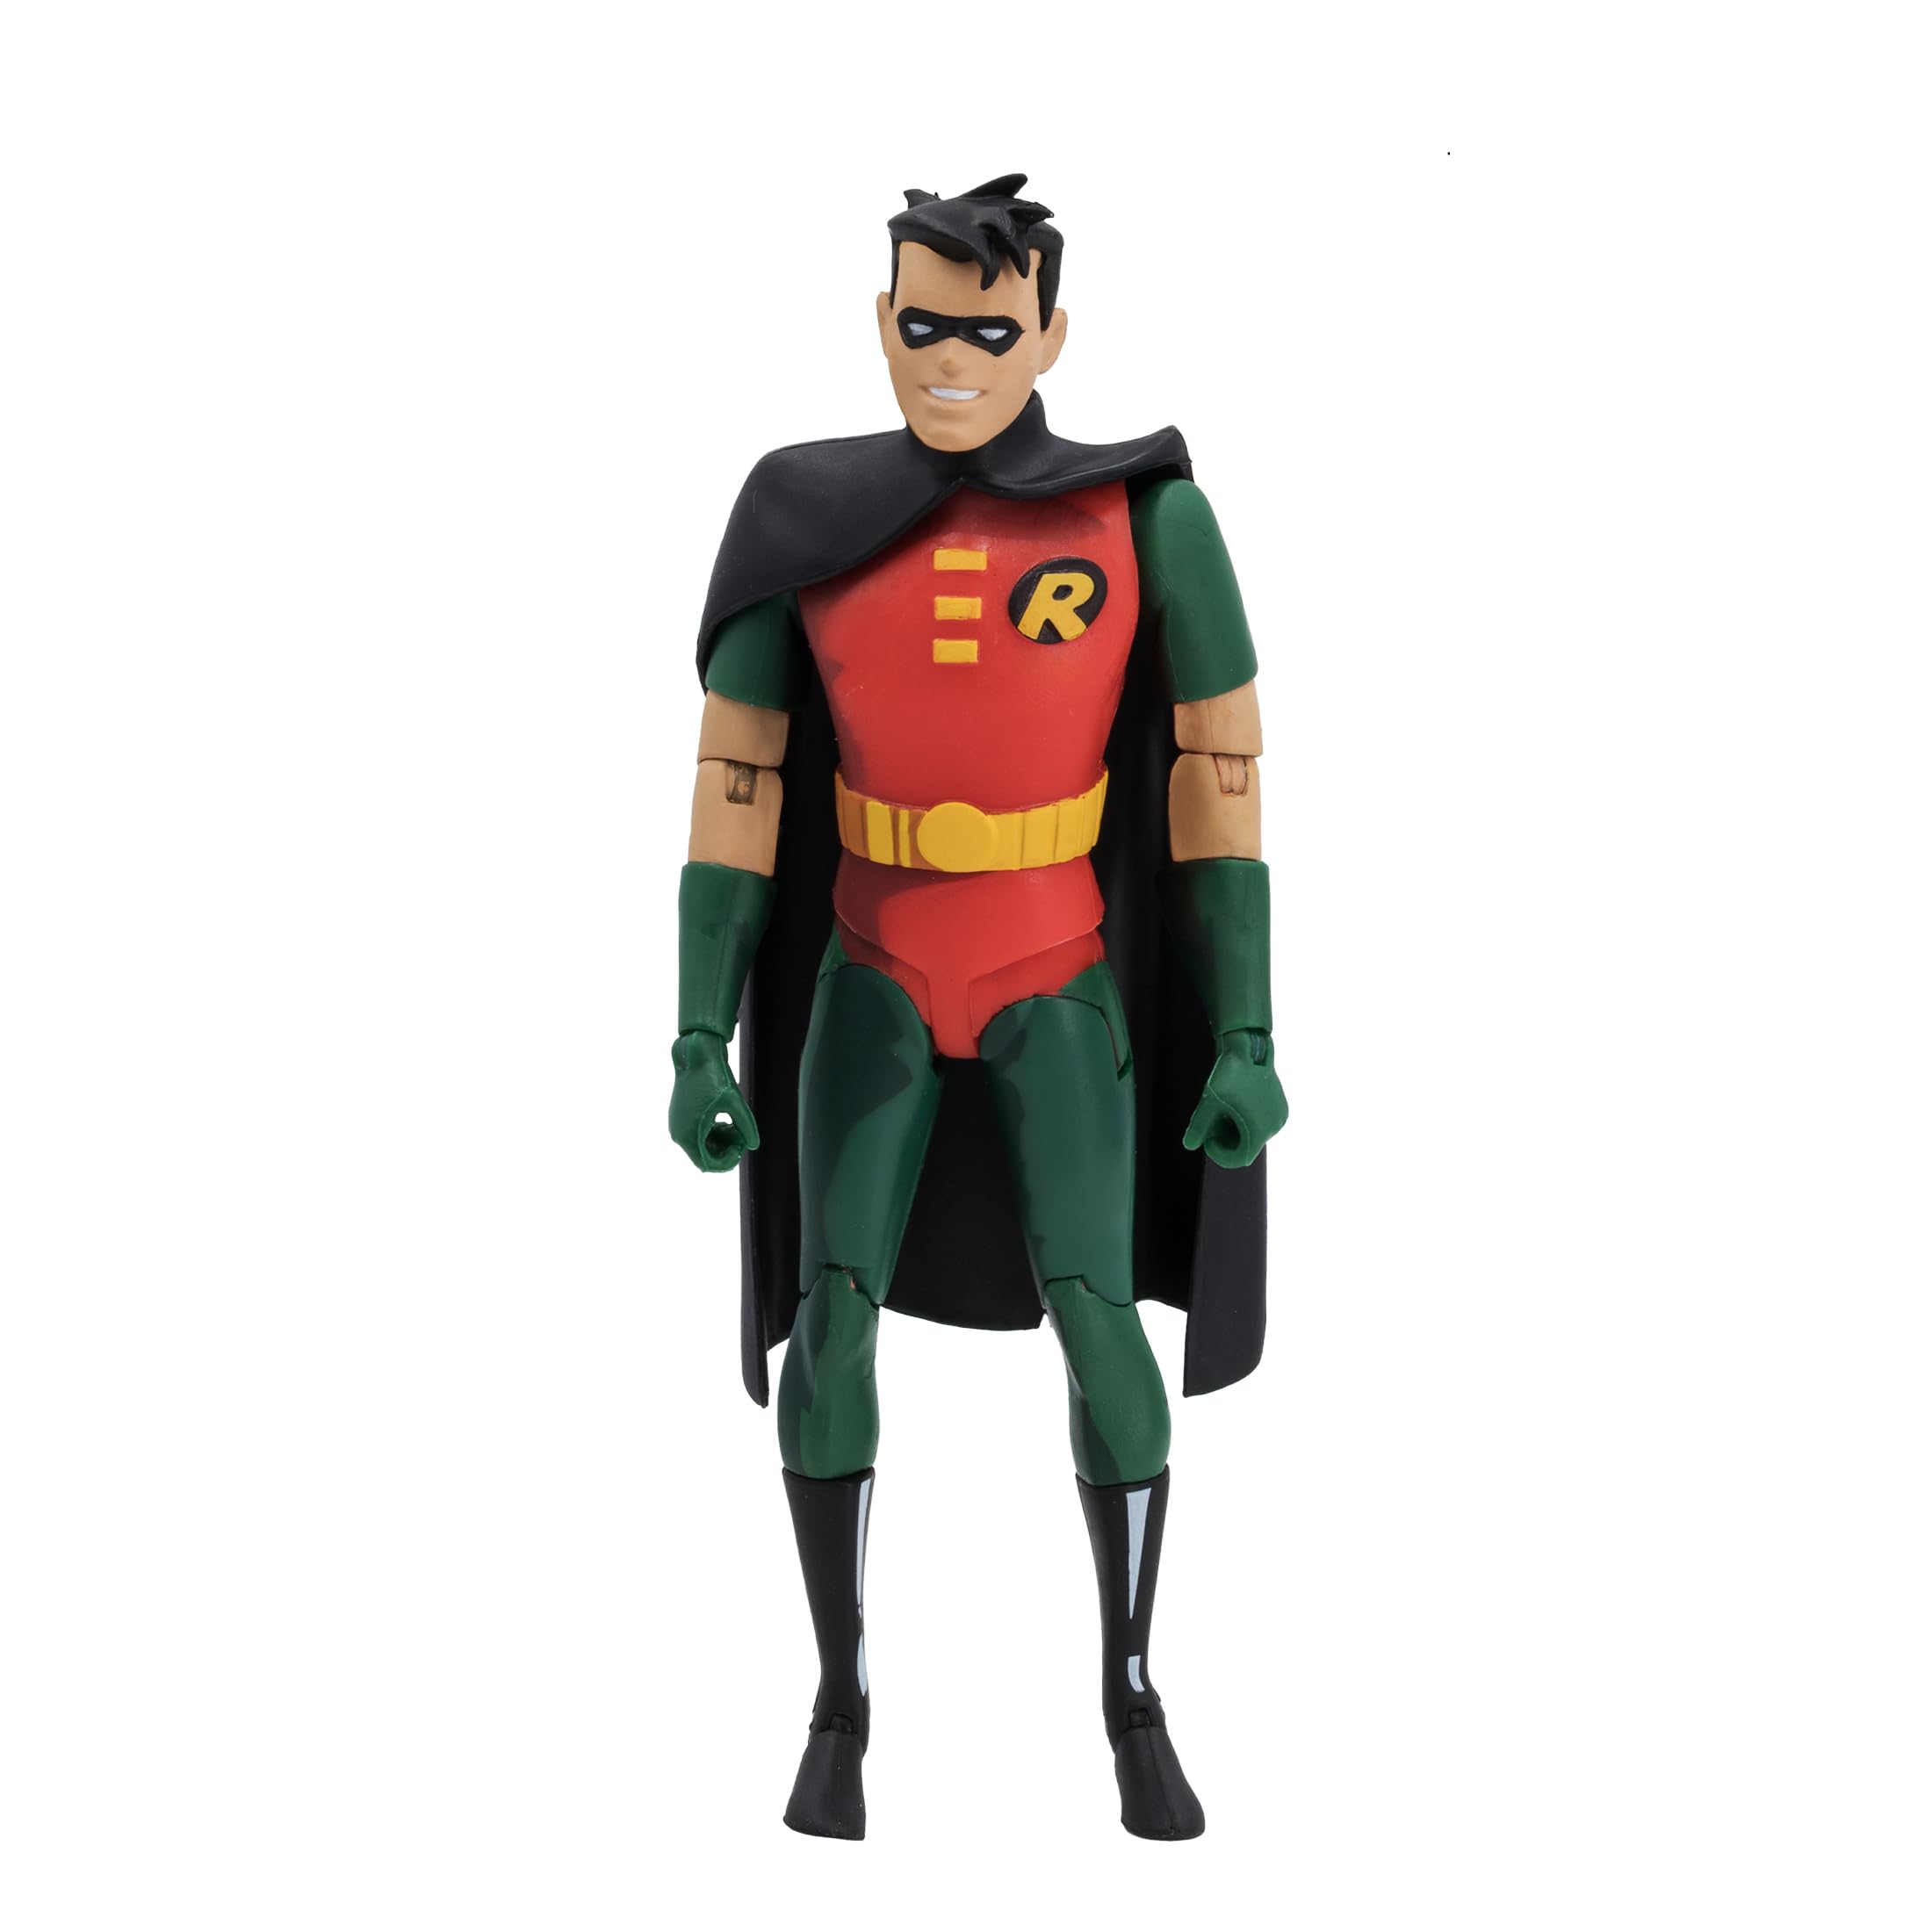 DC Direct Batman The Animated Series 6 Inch Action Figure Wave 1 - Robin